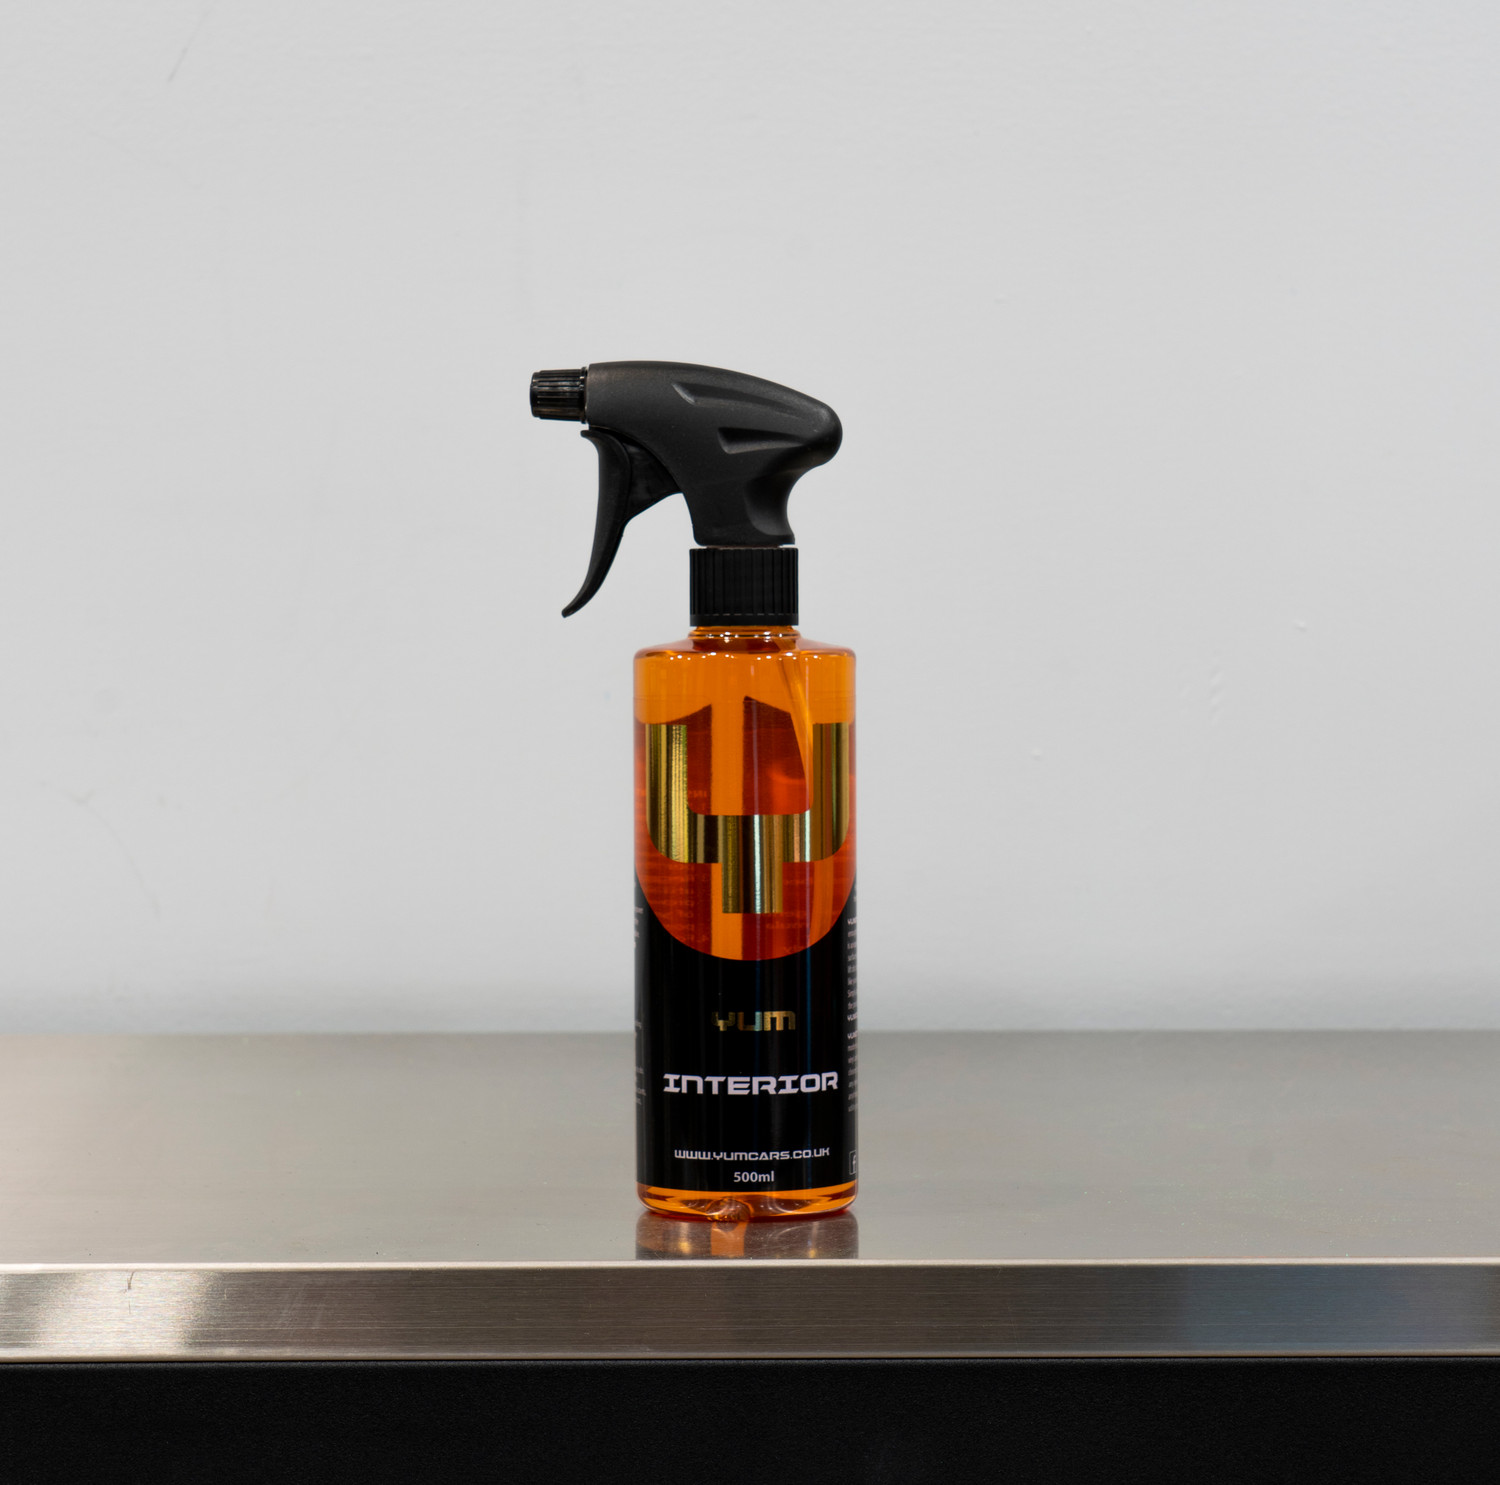 High Quality Engine Cleaner Spray Car Cleaner Engine Protector Cleaner  Spray 500ml